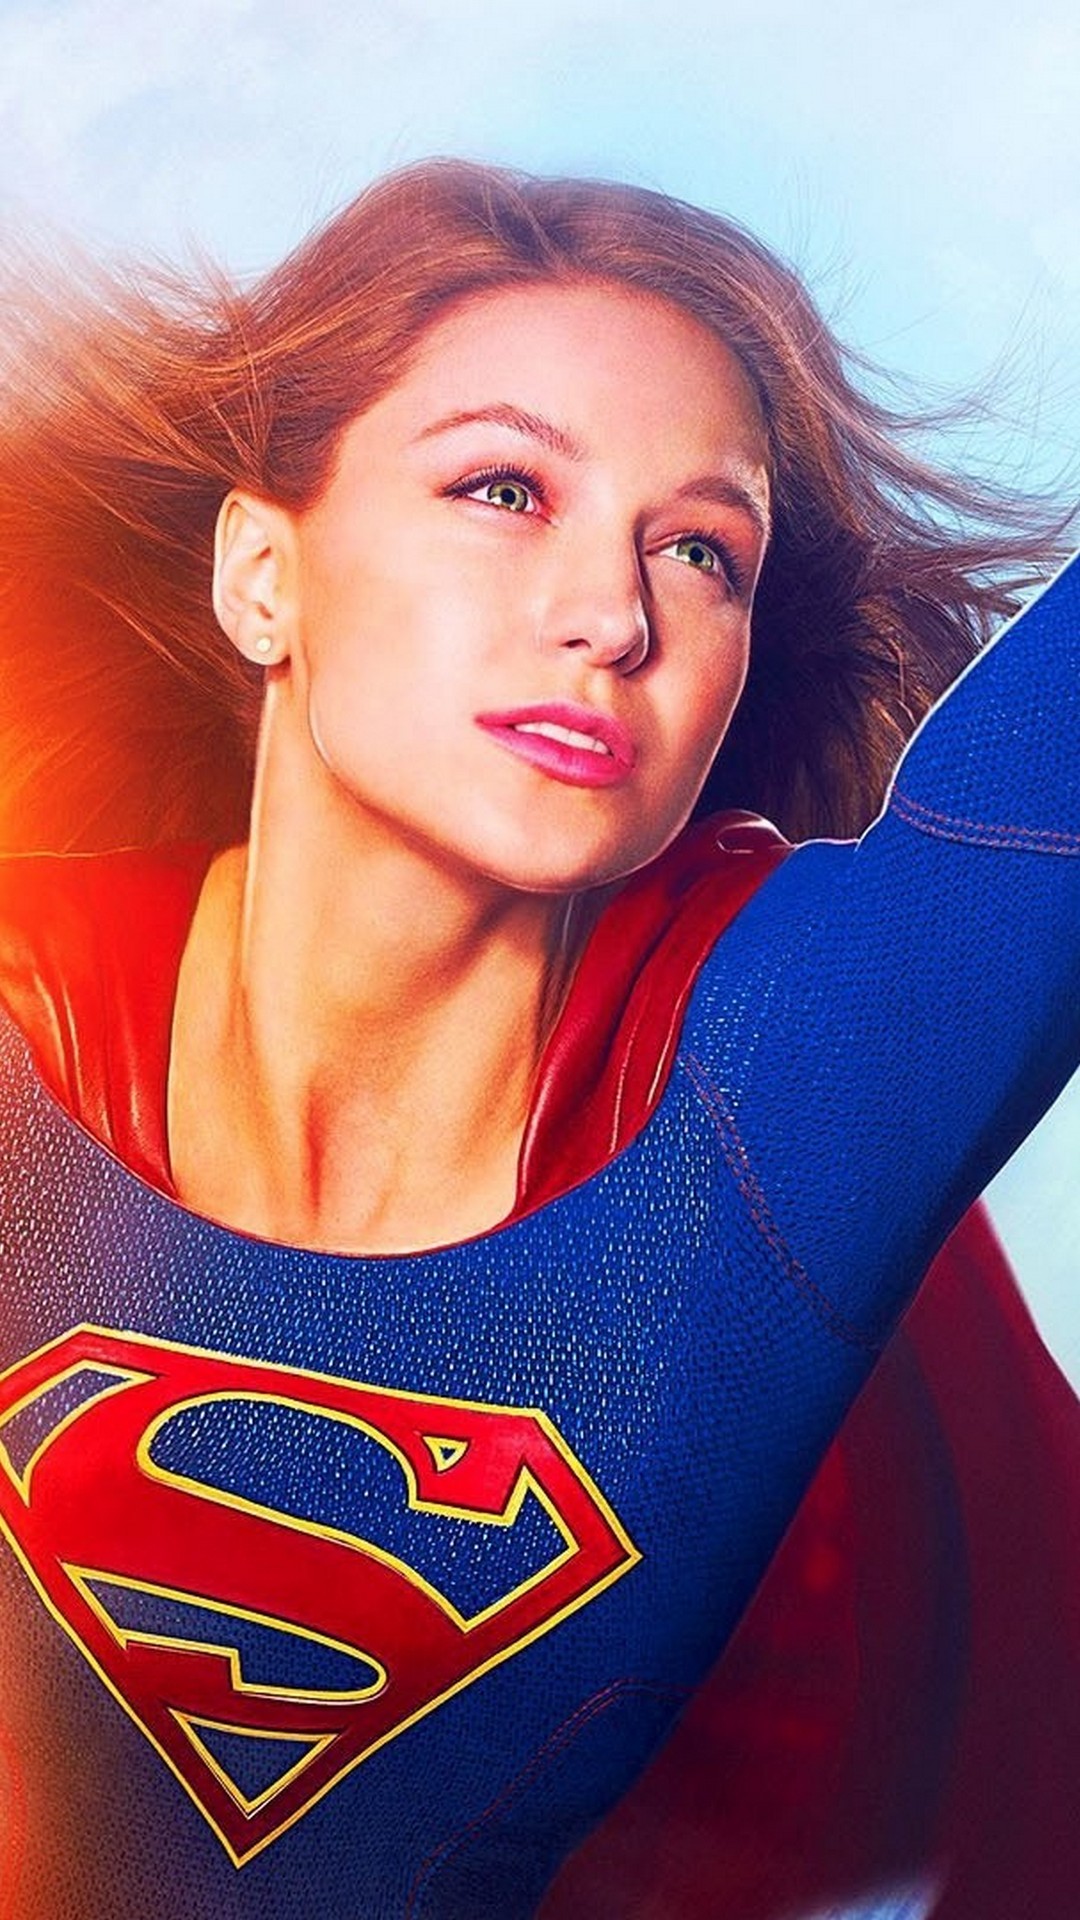 Supergirl Phone Wallpaper with high-resolution 1080x1920 pixel. Download all Mobile Wallpapers and Use them as wallpapers for your iPhone, Tablet, iPad, Android and other mobile devices